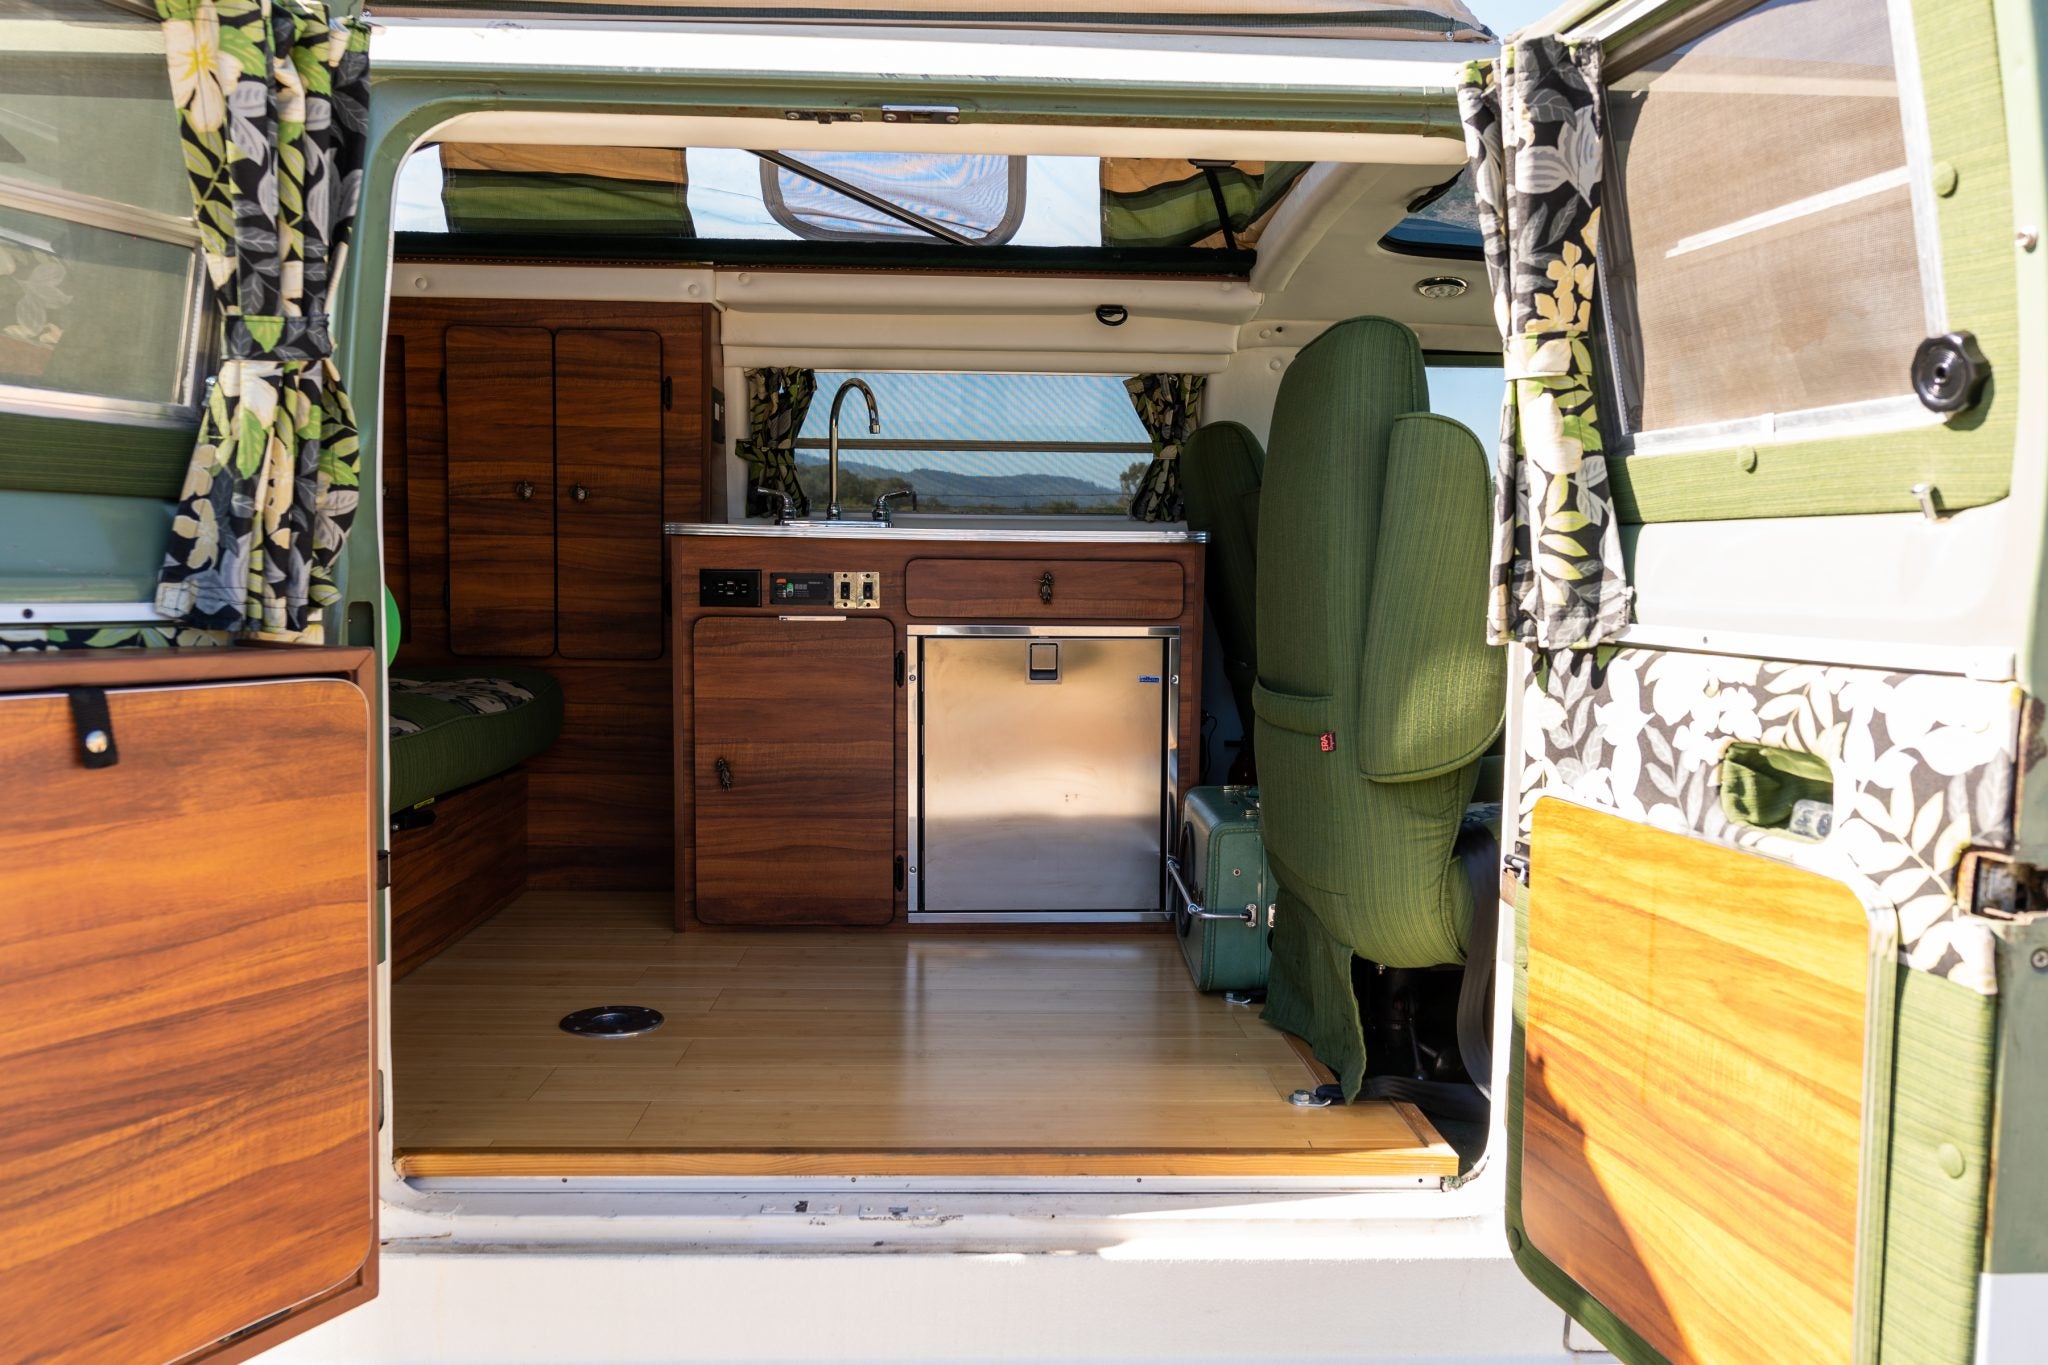 This Old Conversion Van Was Turned Into an Epic 4×4 Camping Rig